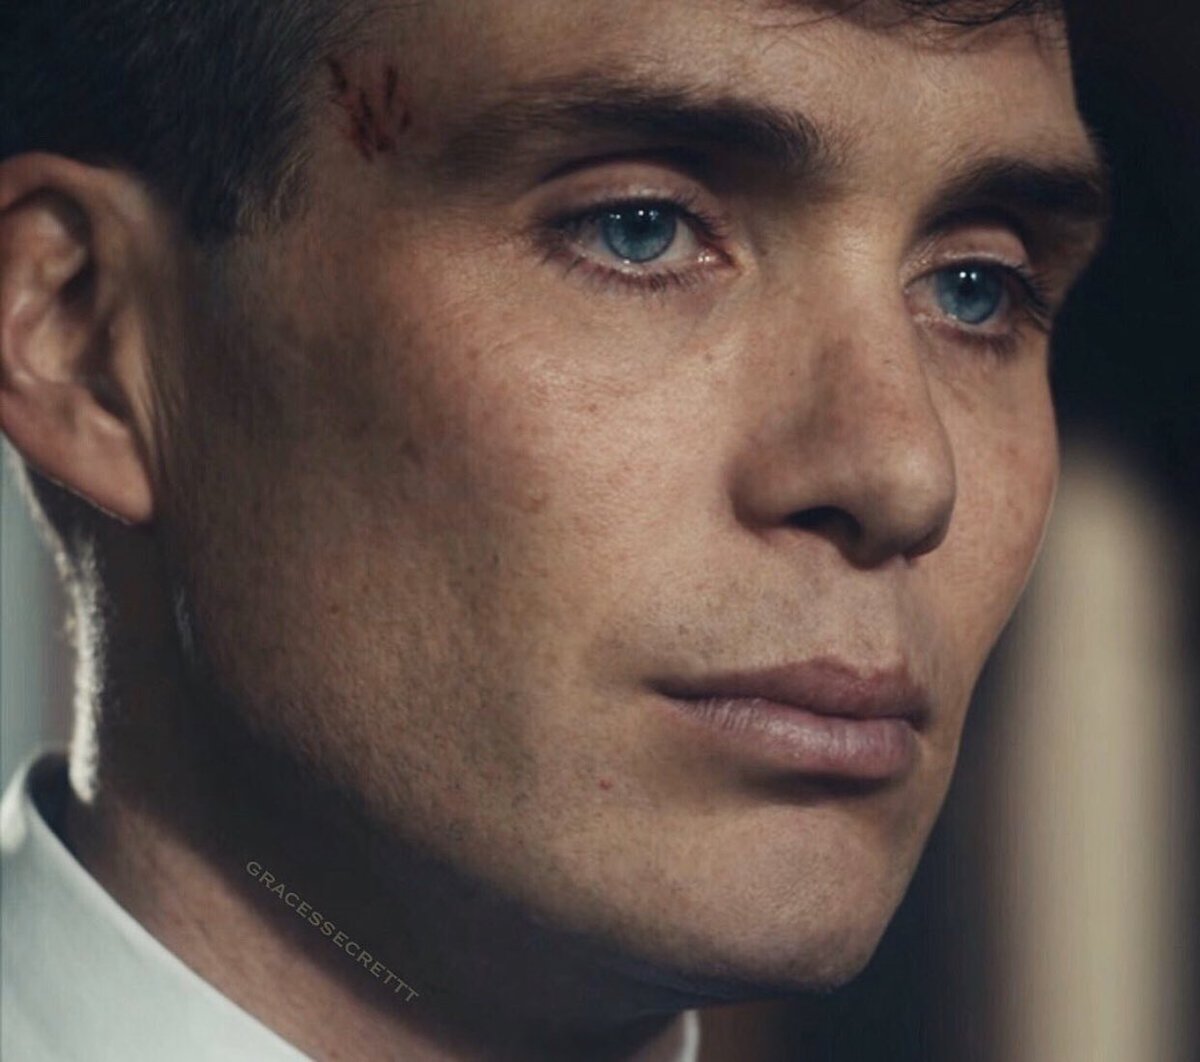 Tommy Tuesday.

#CillianMurphy  #TommyShelby